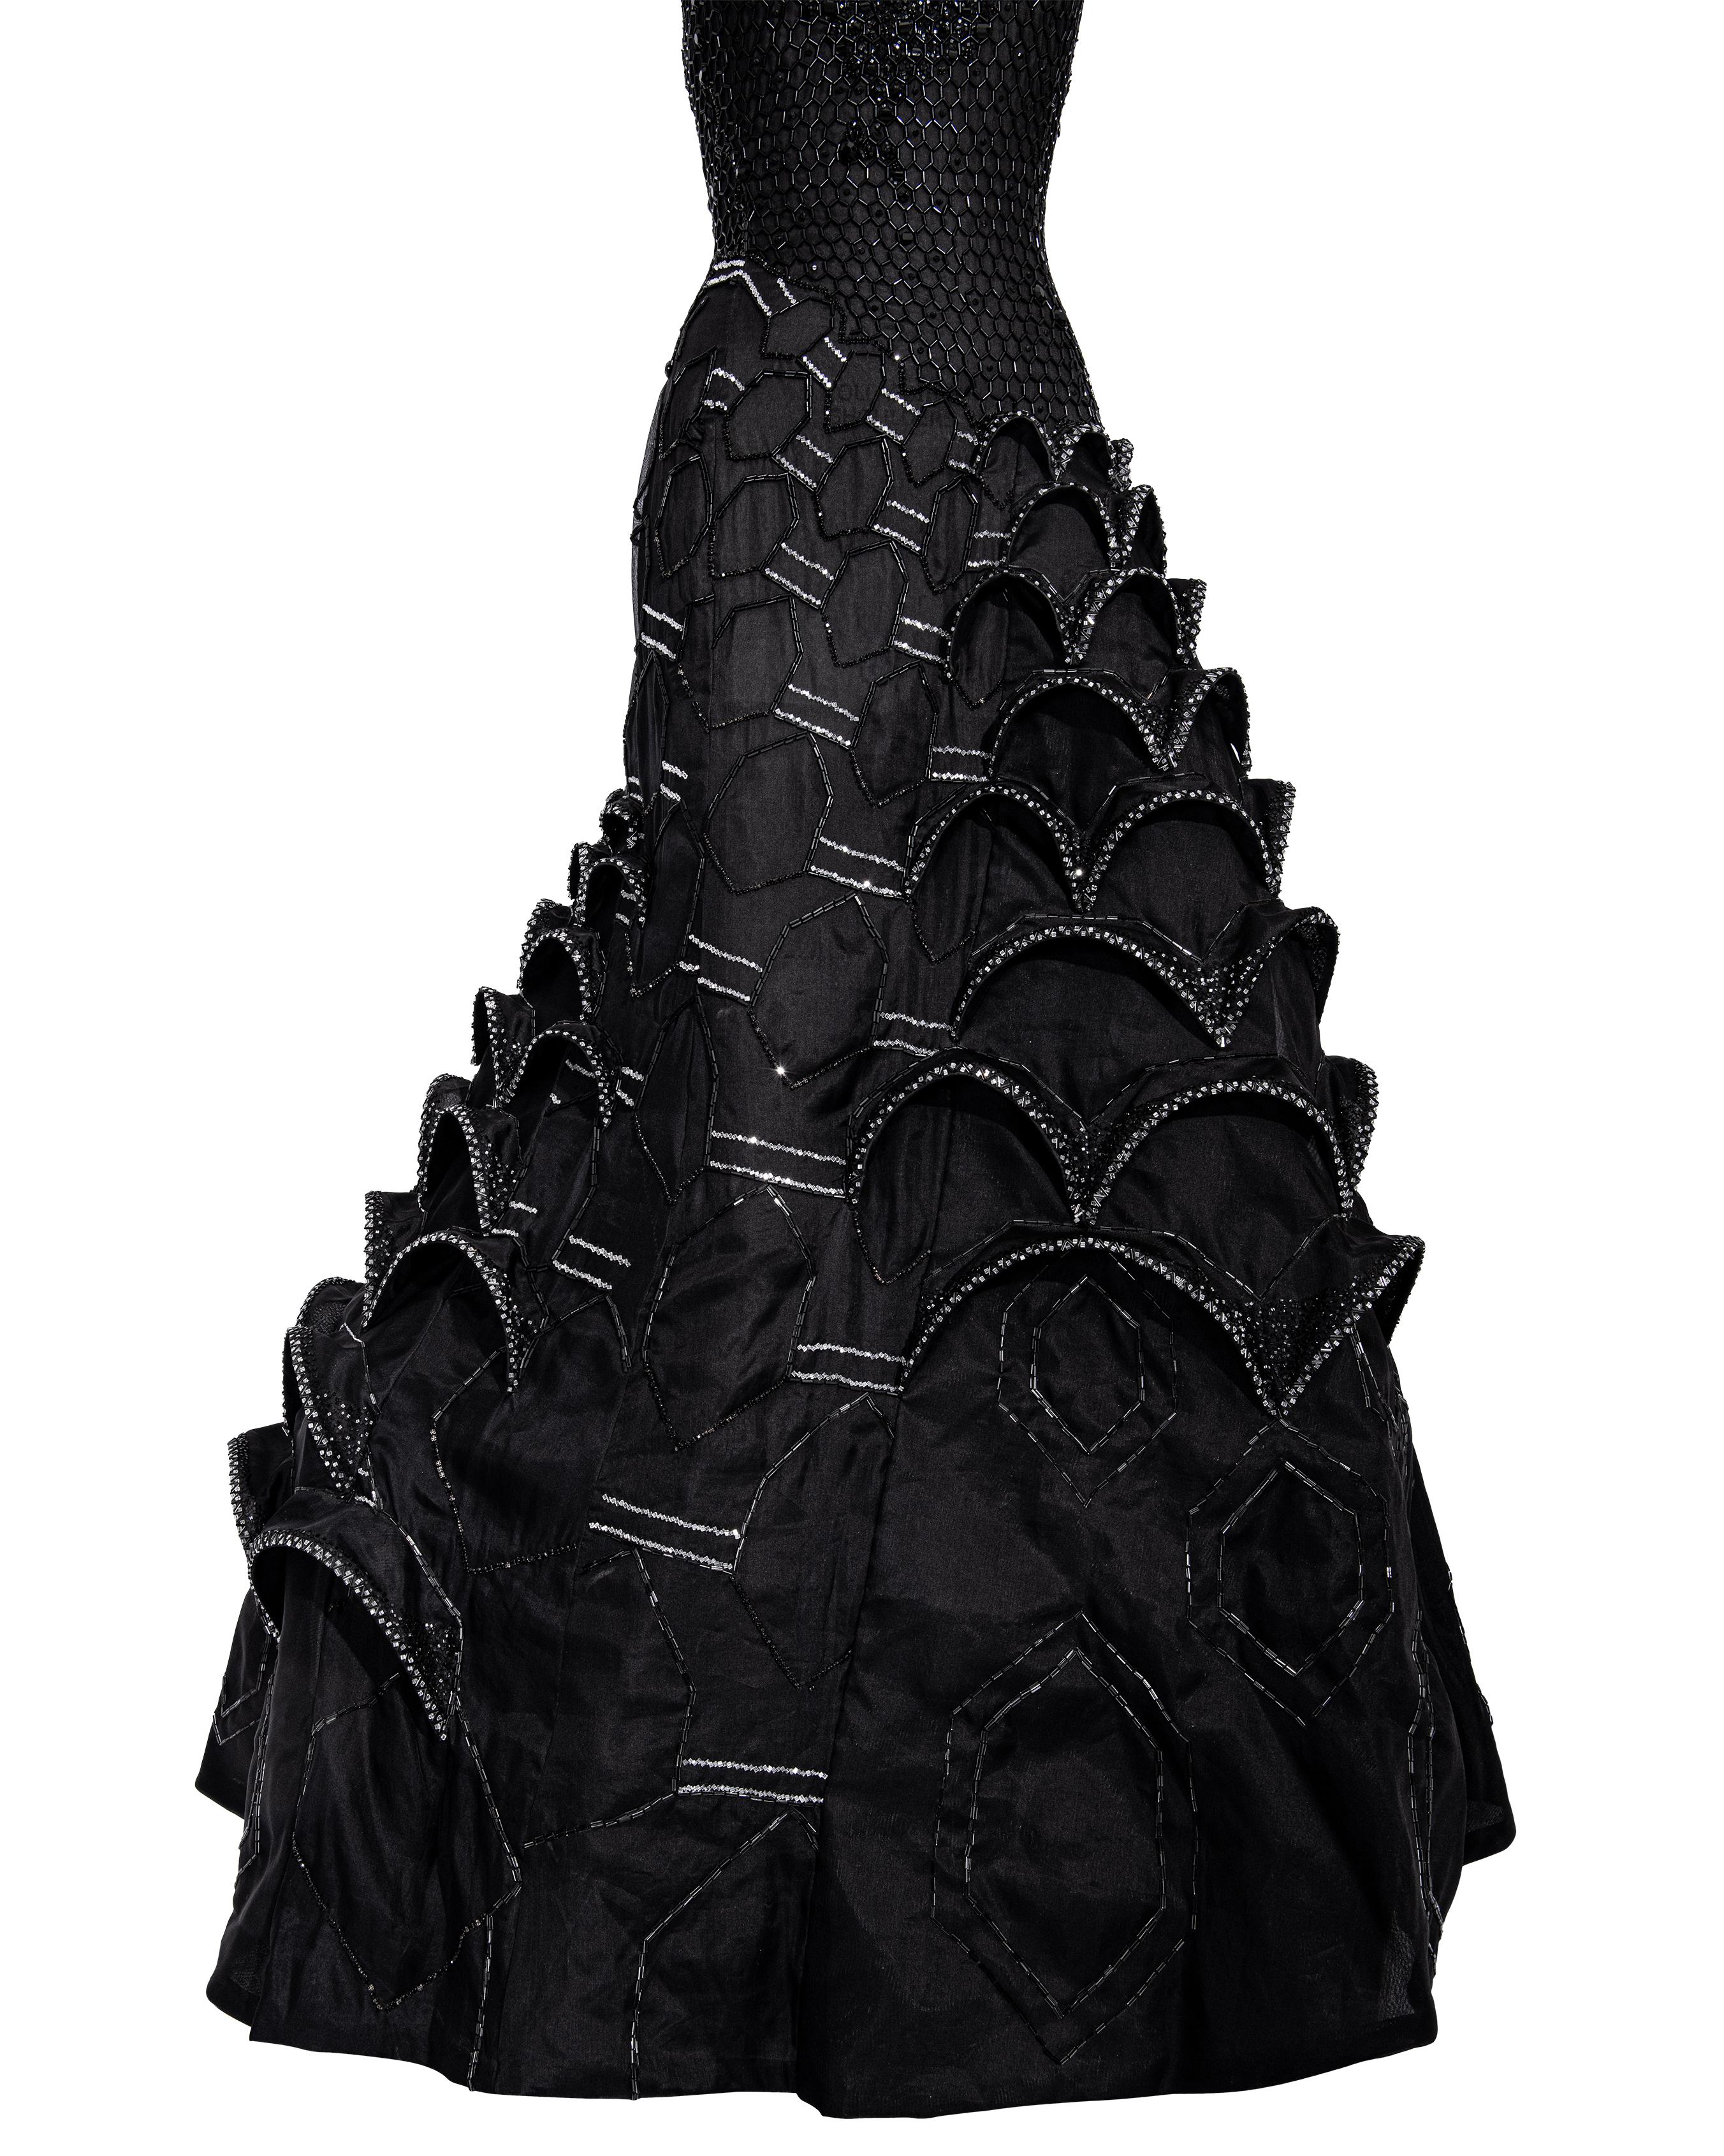 S/S 1999 Atelier Versace Haute Couture Black Embellished Sculptural Gown 5